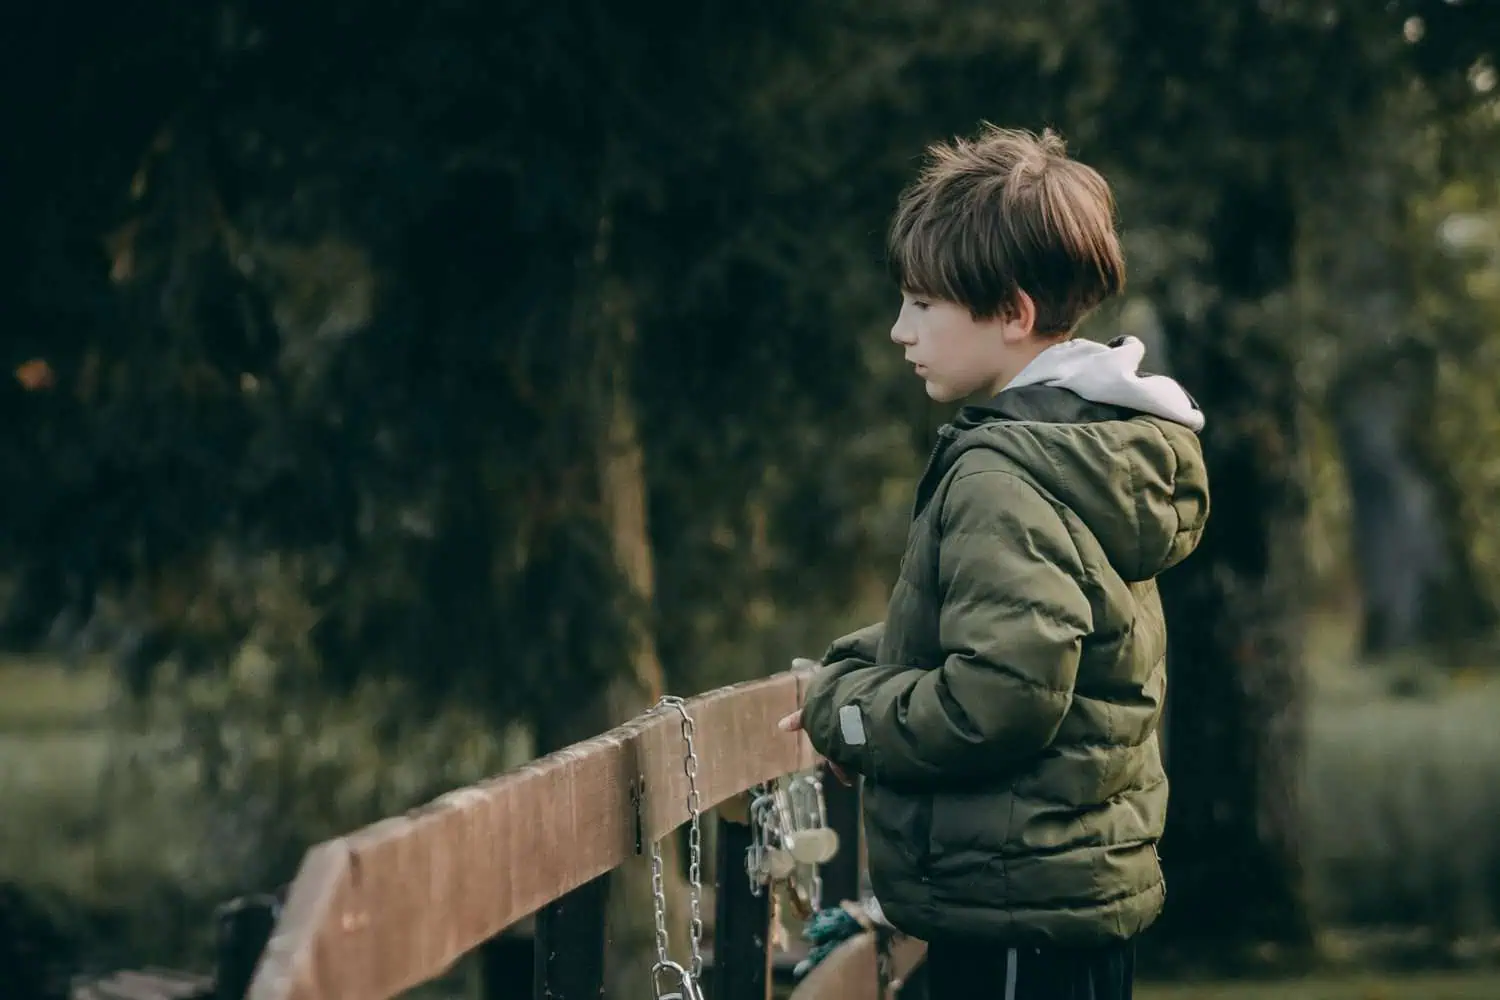 Adorable young boy wearing jacket standing near wooden fence at the park